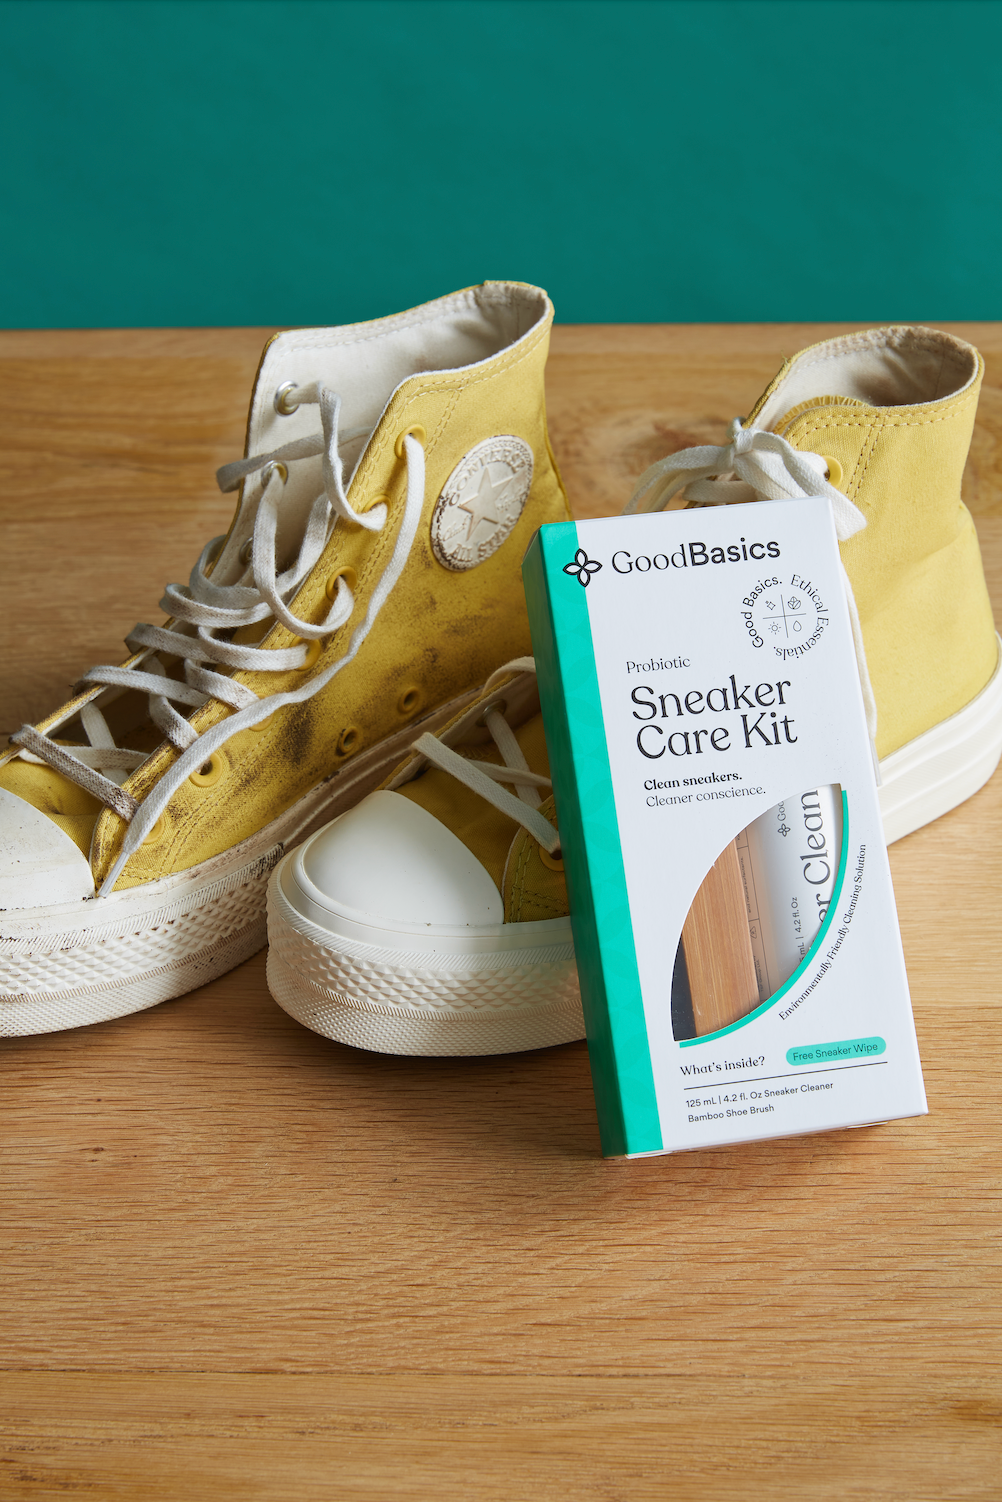 Staying Fresh: GoodBasics’ Probiotic Sneaker Care Kit — A Quick Guide to Keeping Your Sneakers in Tip-Top Shape